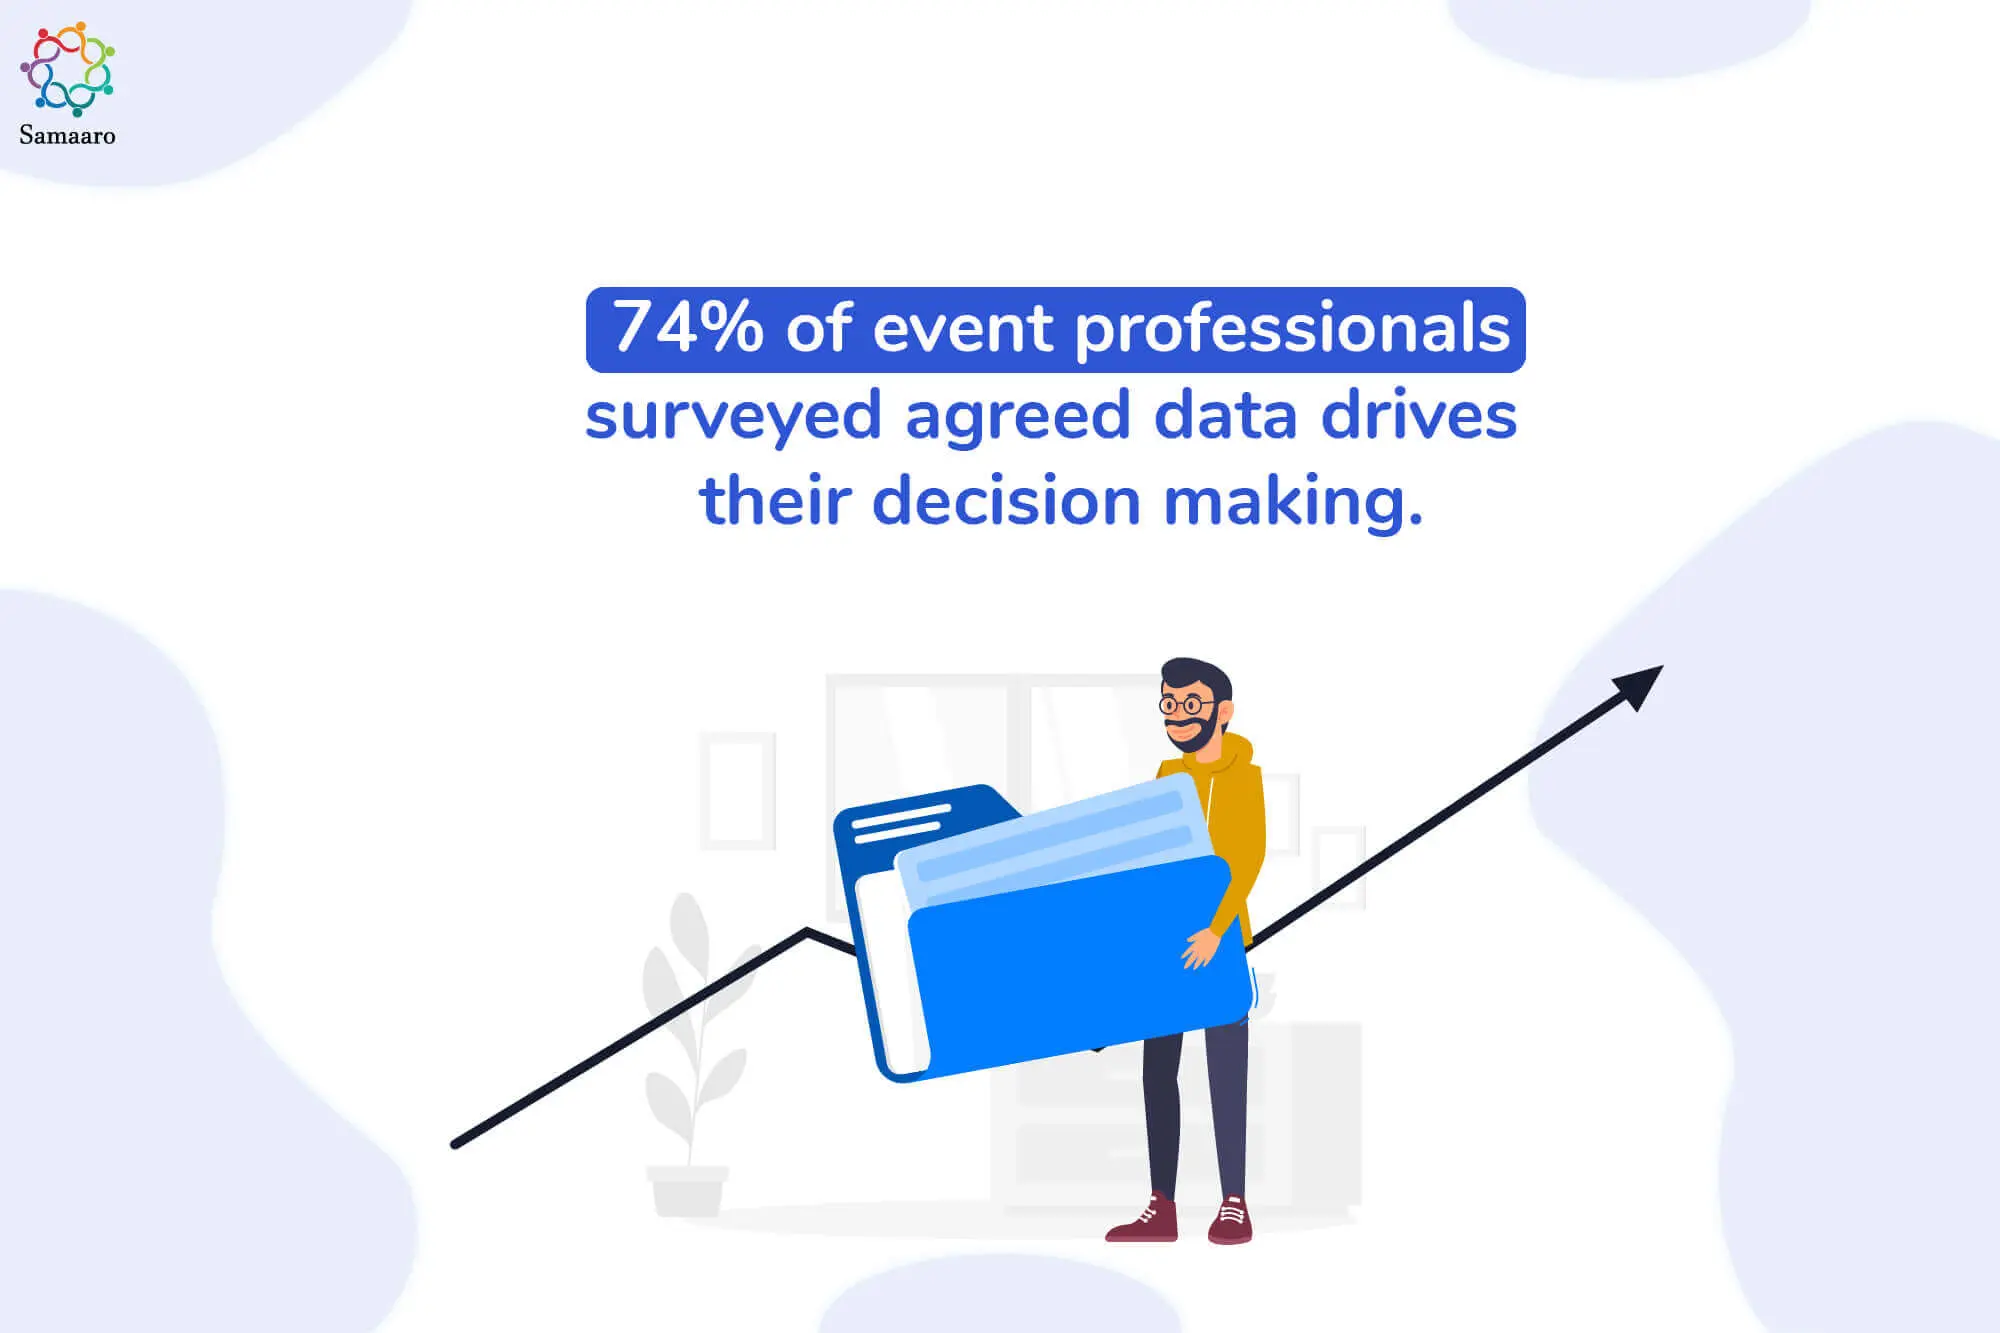 74% of event professionals agreed data drives decision making